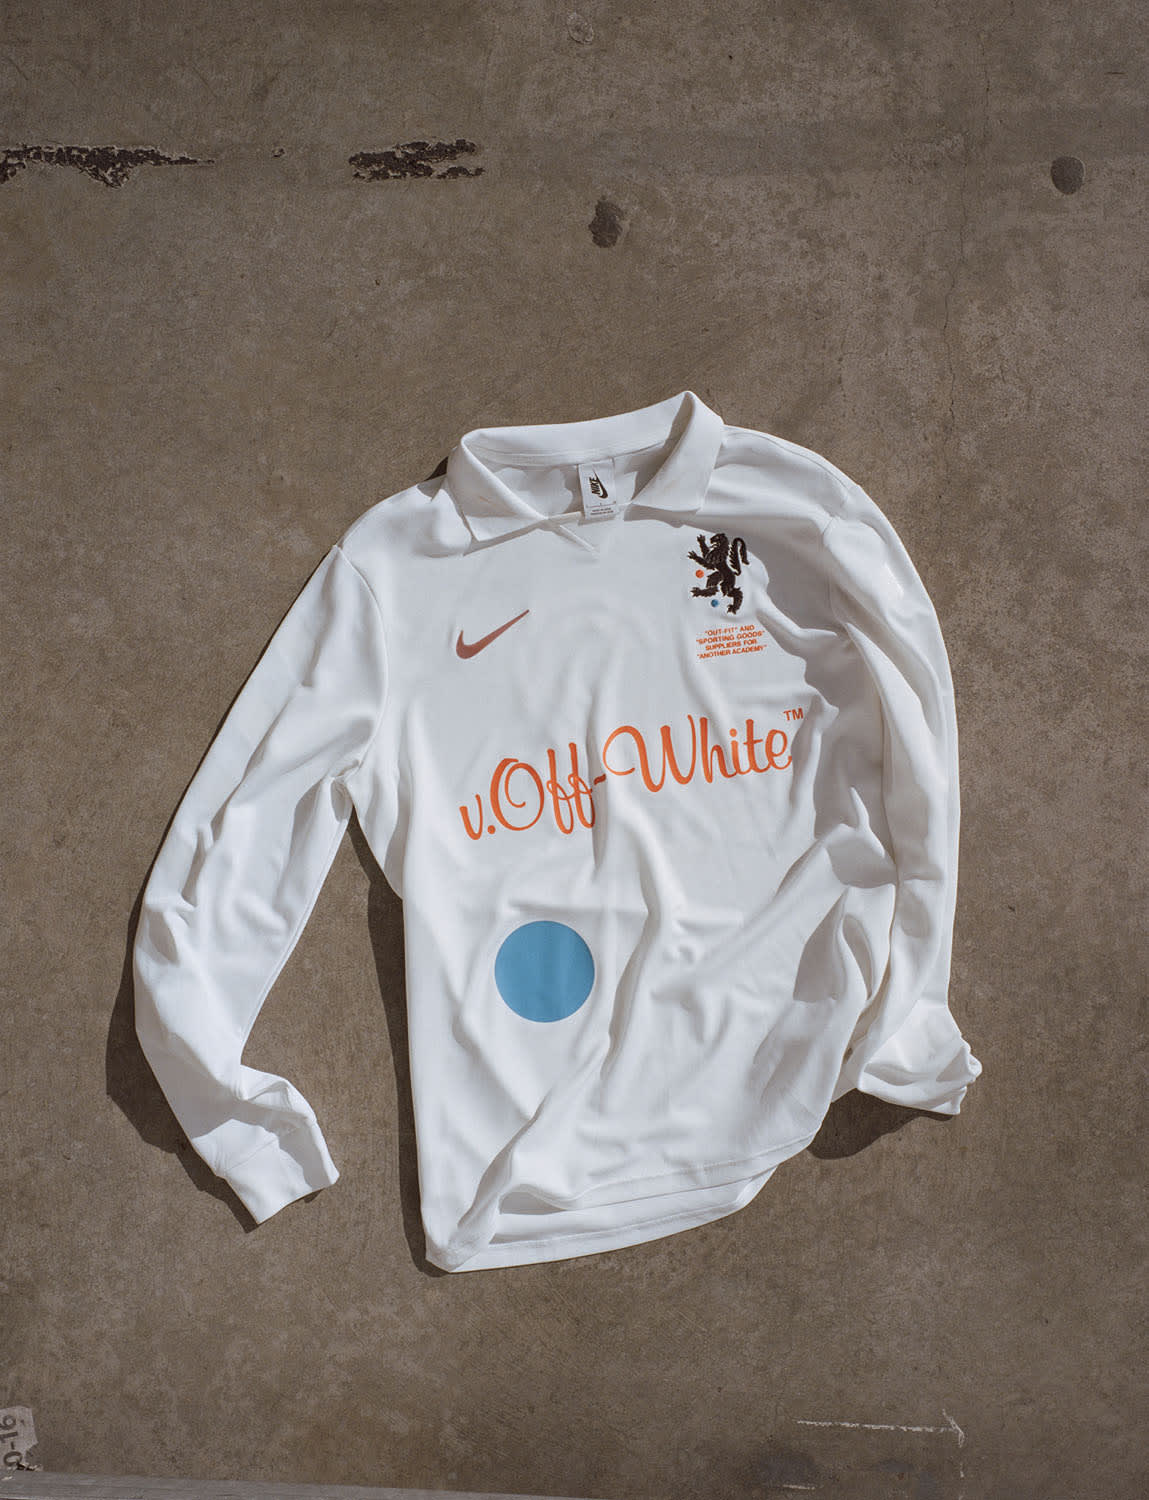 Virgil Abloh Expresses Love for Soccer with New Off-White x Nike Collection